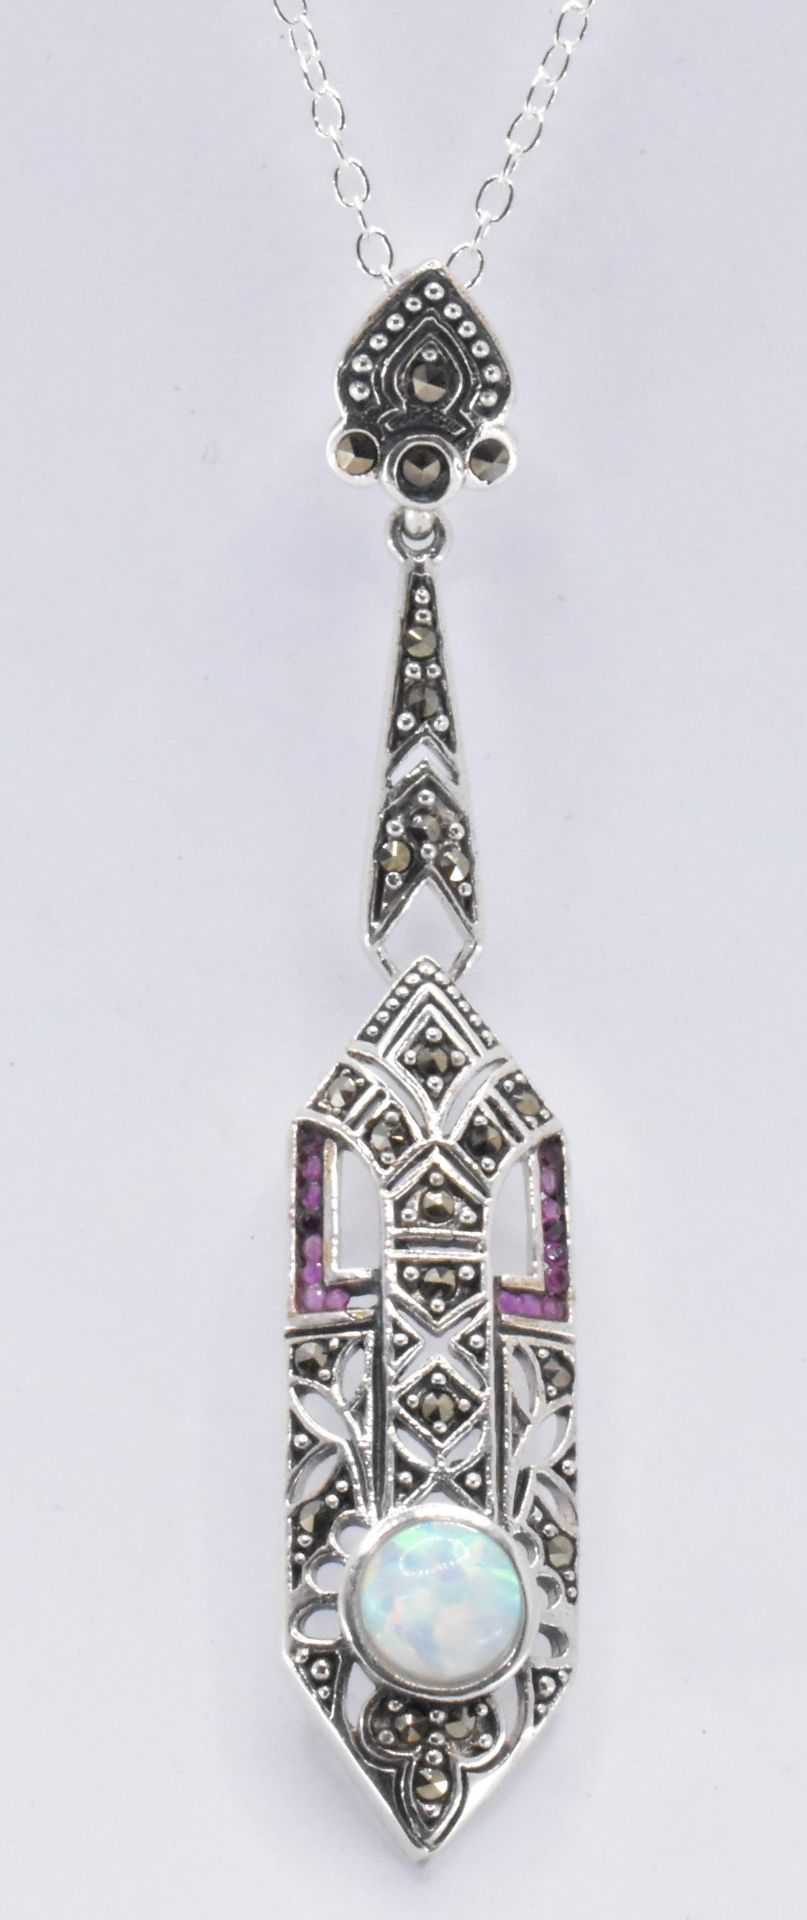 ART DECO STYLE SILVER & OPAL PENDANT NECKLACE - Image 2 of 5